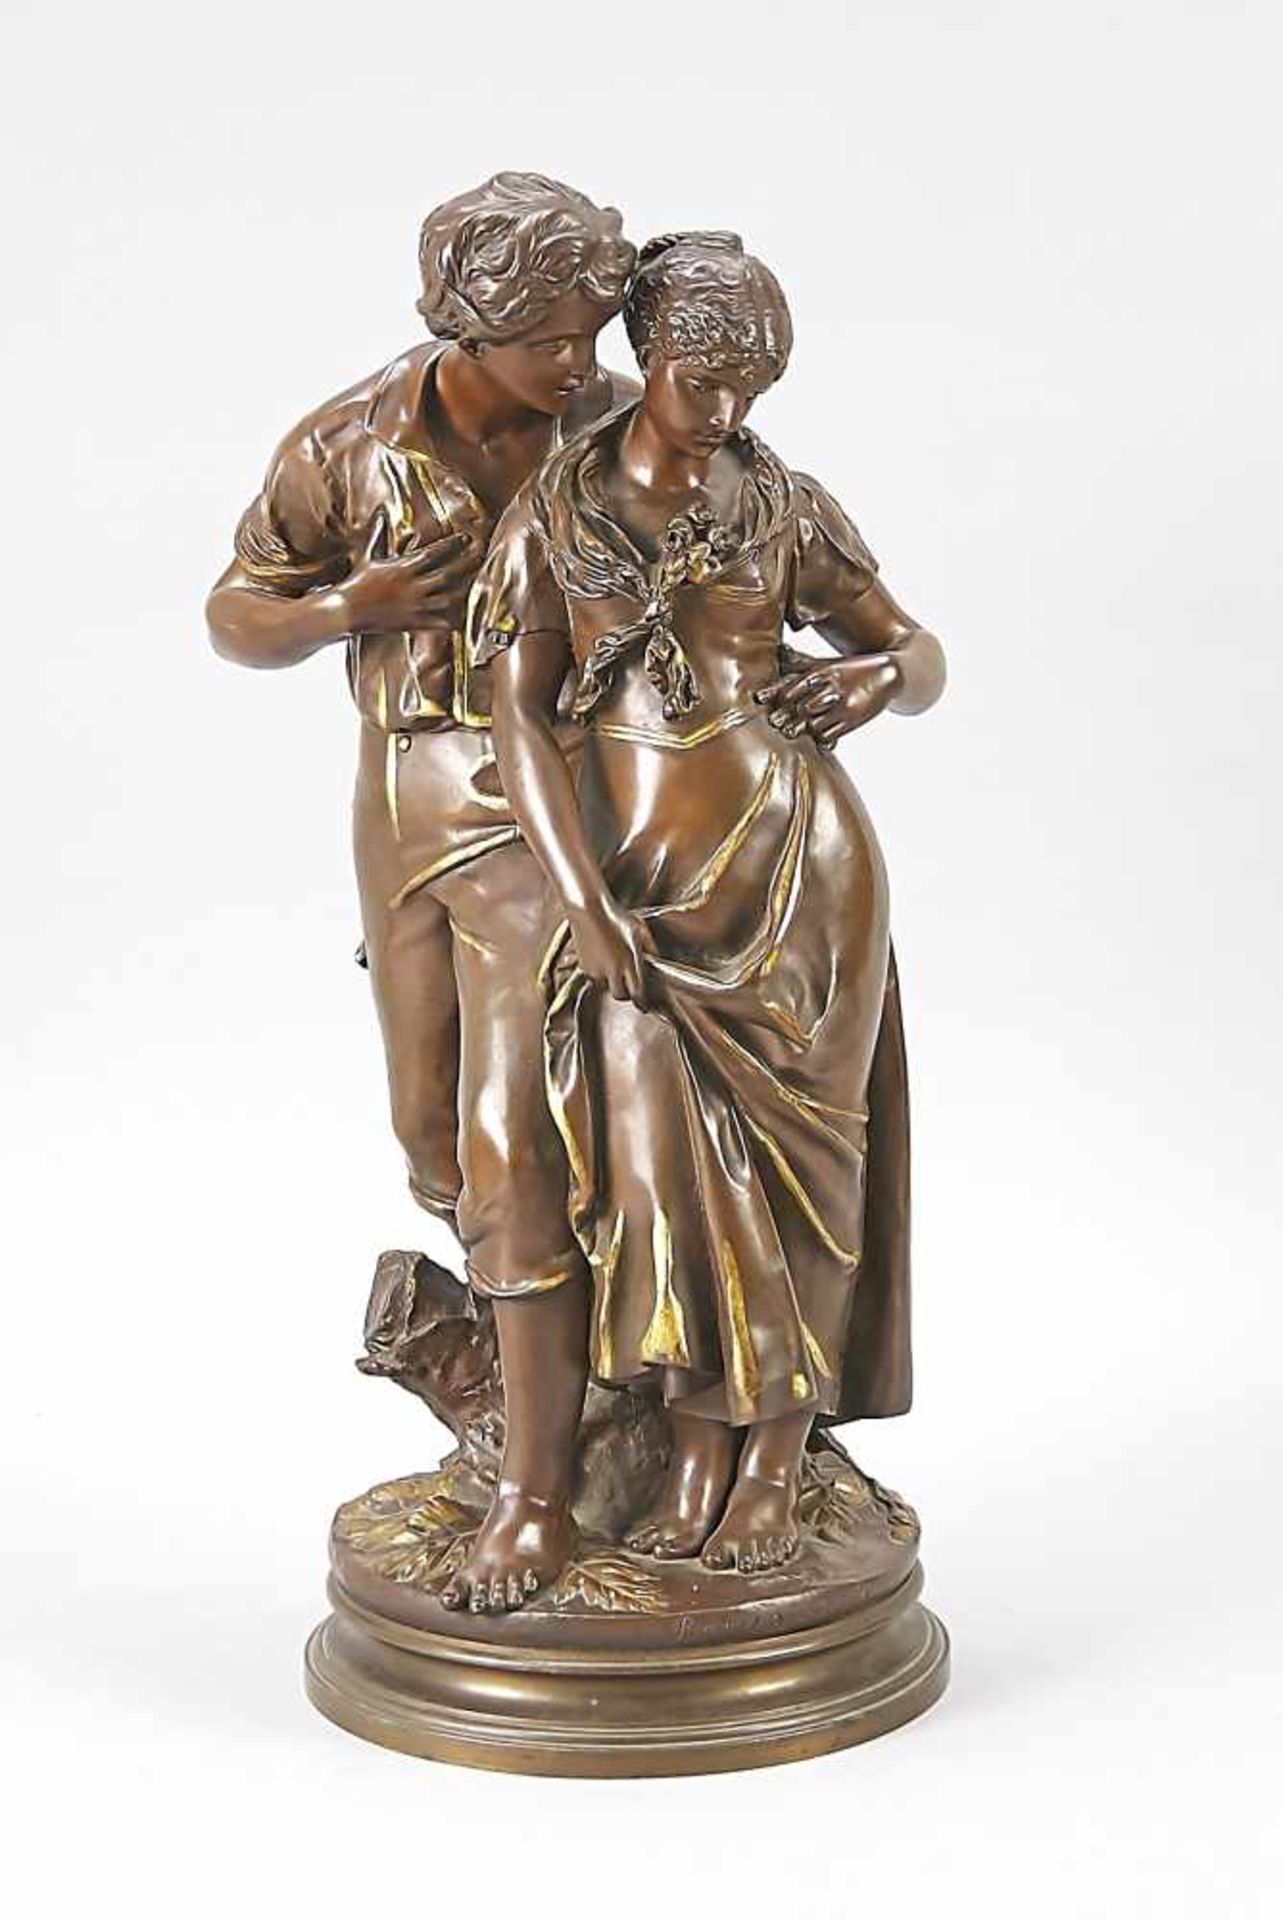 Luca Madrassi (1848-1919), Italian sculptor, couple embracing, while the young man seems